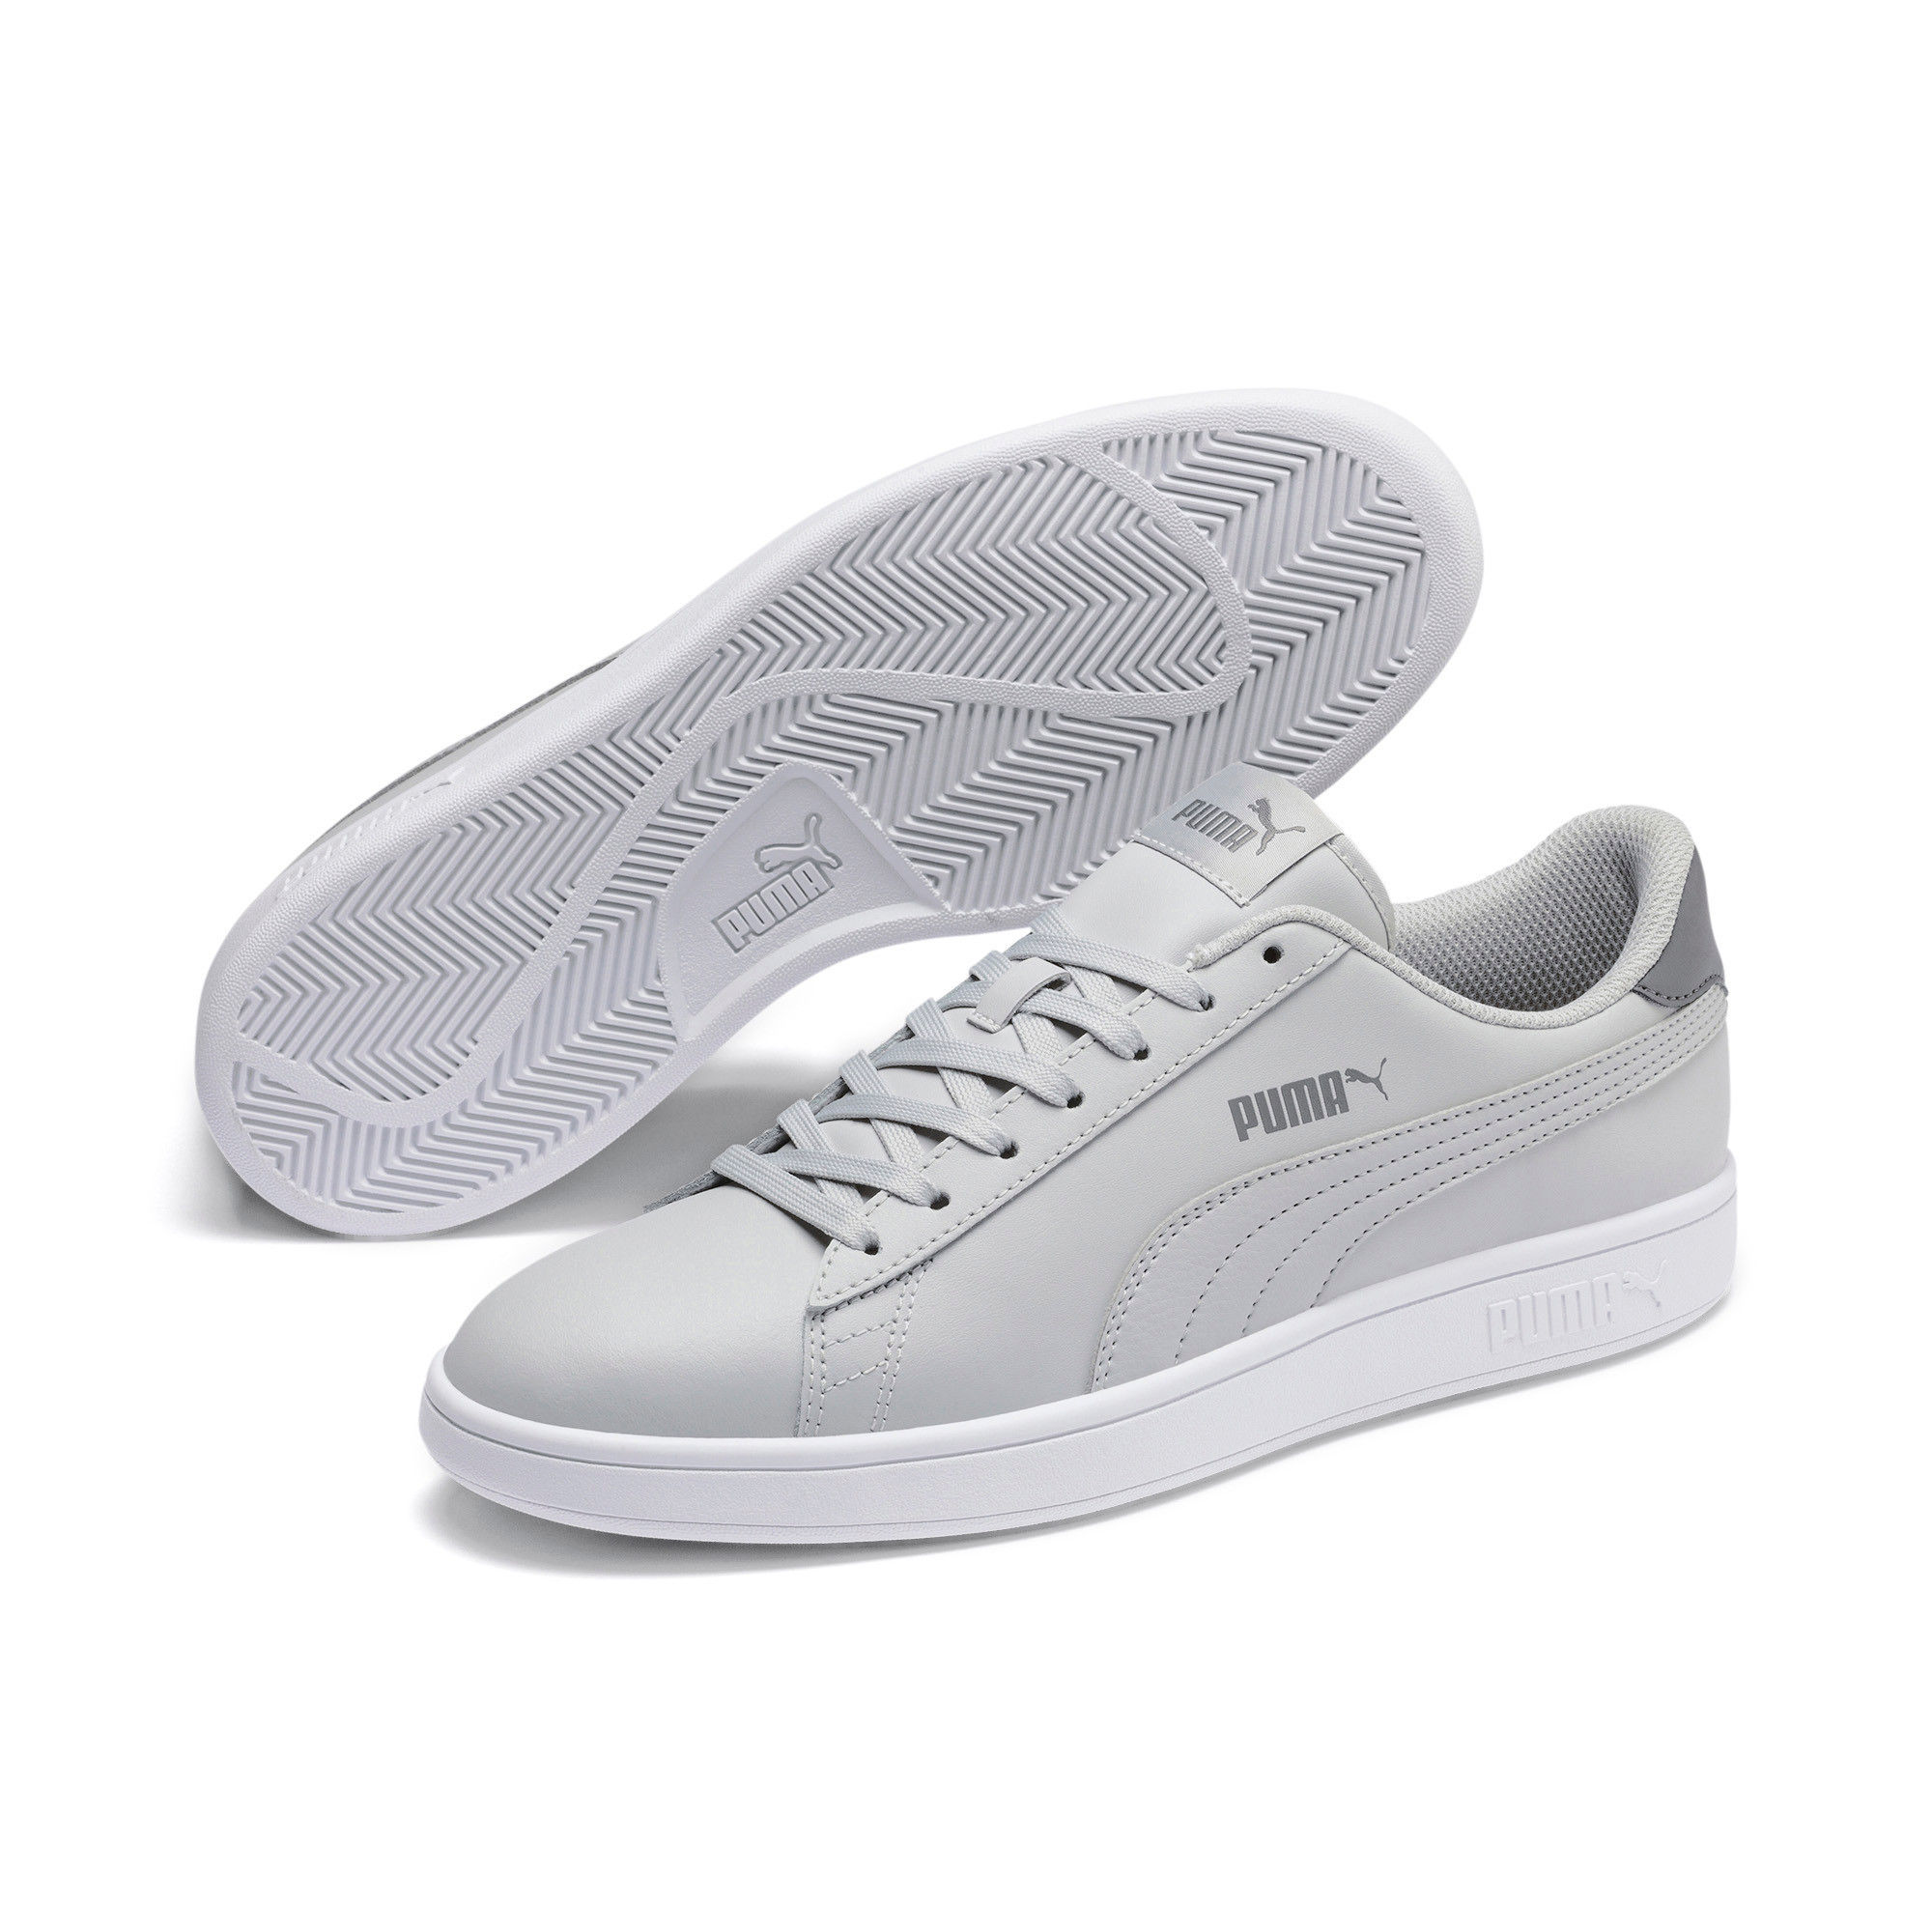 Alexander McQueen X PUMA Leather Sneakers Shoes 40 Auth Women New from  Japan | eBay